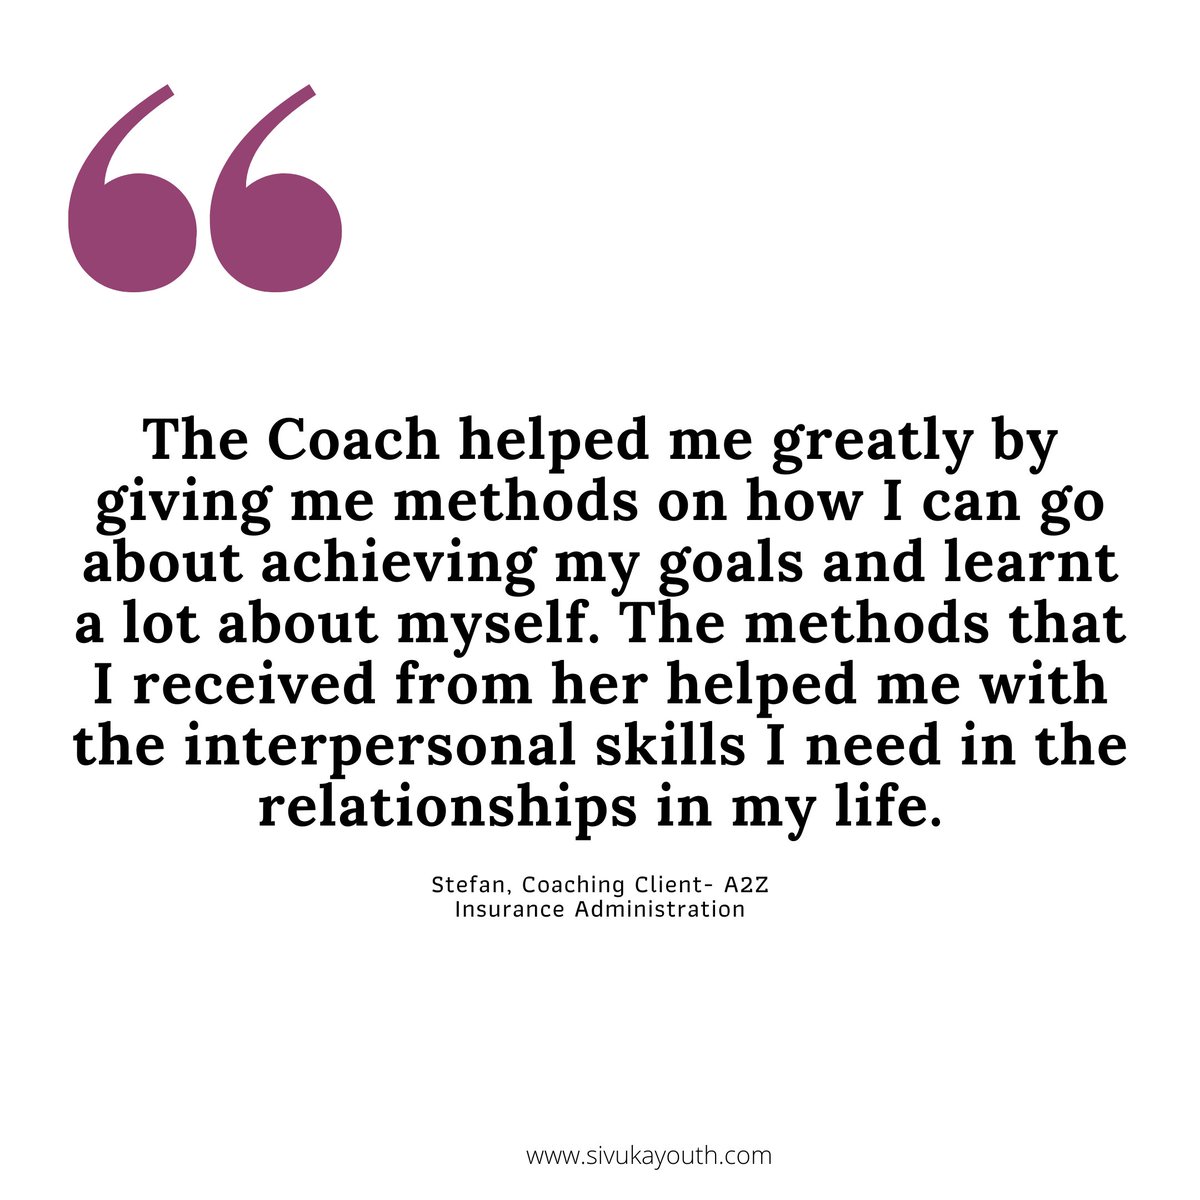 This team LOVES the work we get to do with Youth and hearing this kind of feedback continues to light our FIRE! 

#Sivukayouth #corporatetraining #Youthdevelopment #workreadiness #youth #careercoaching #togetherwerise #education #learninganddevelopment